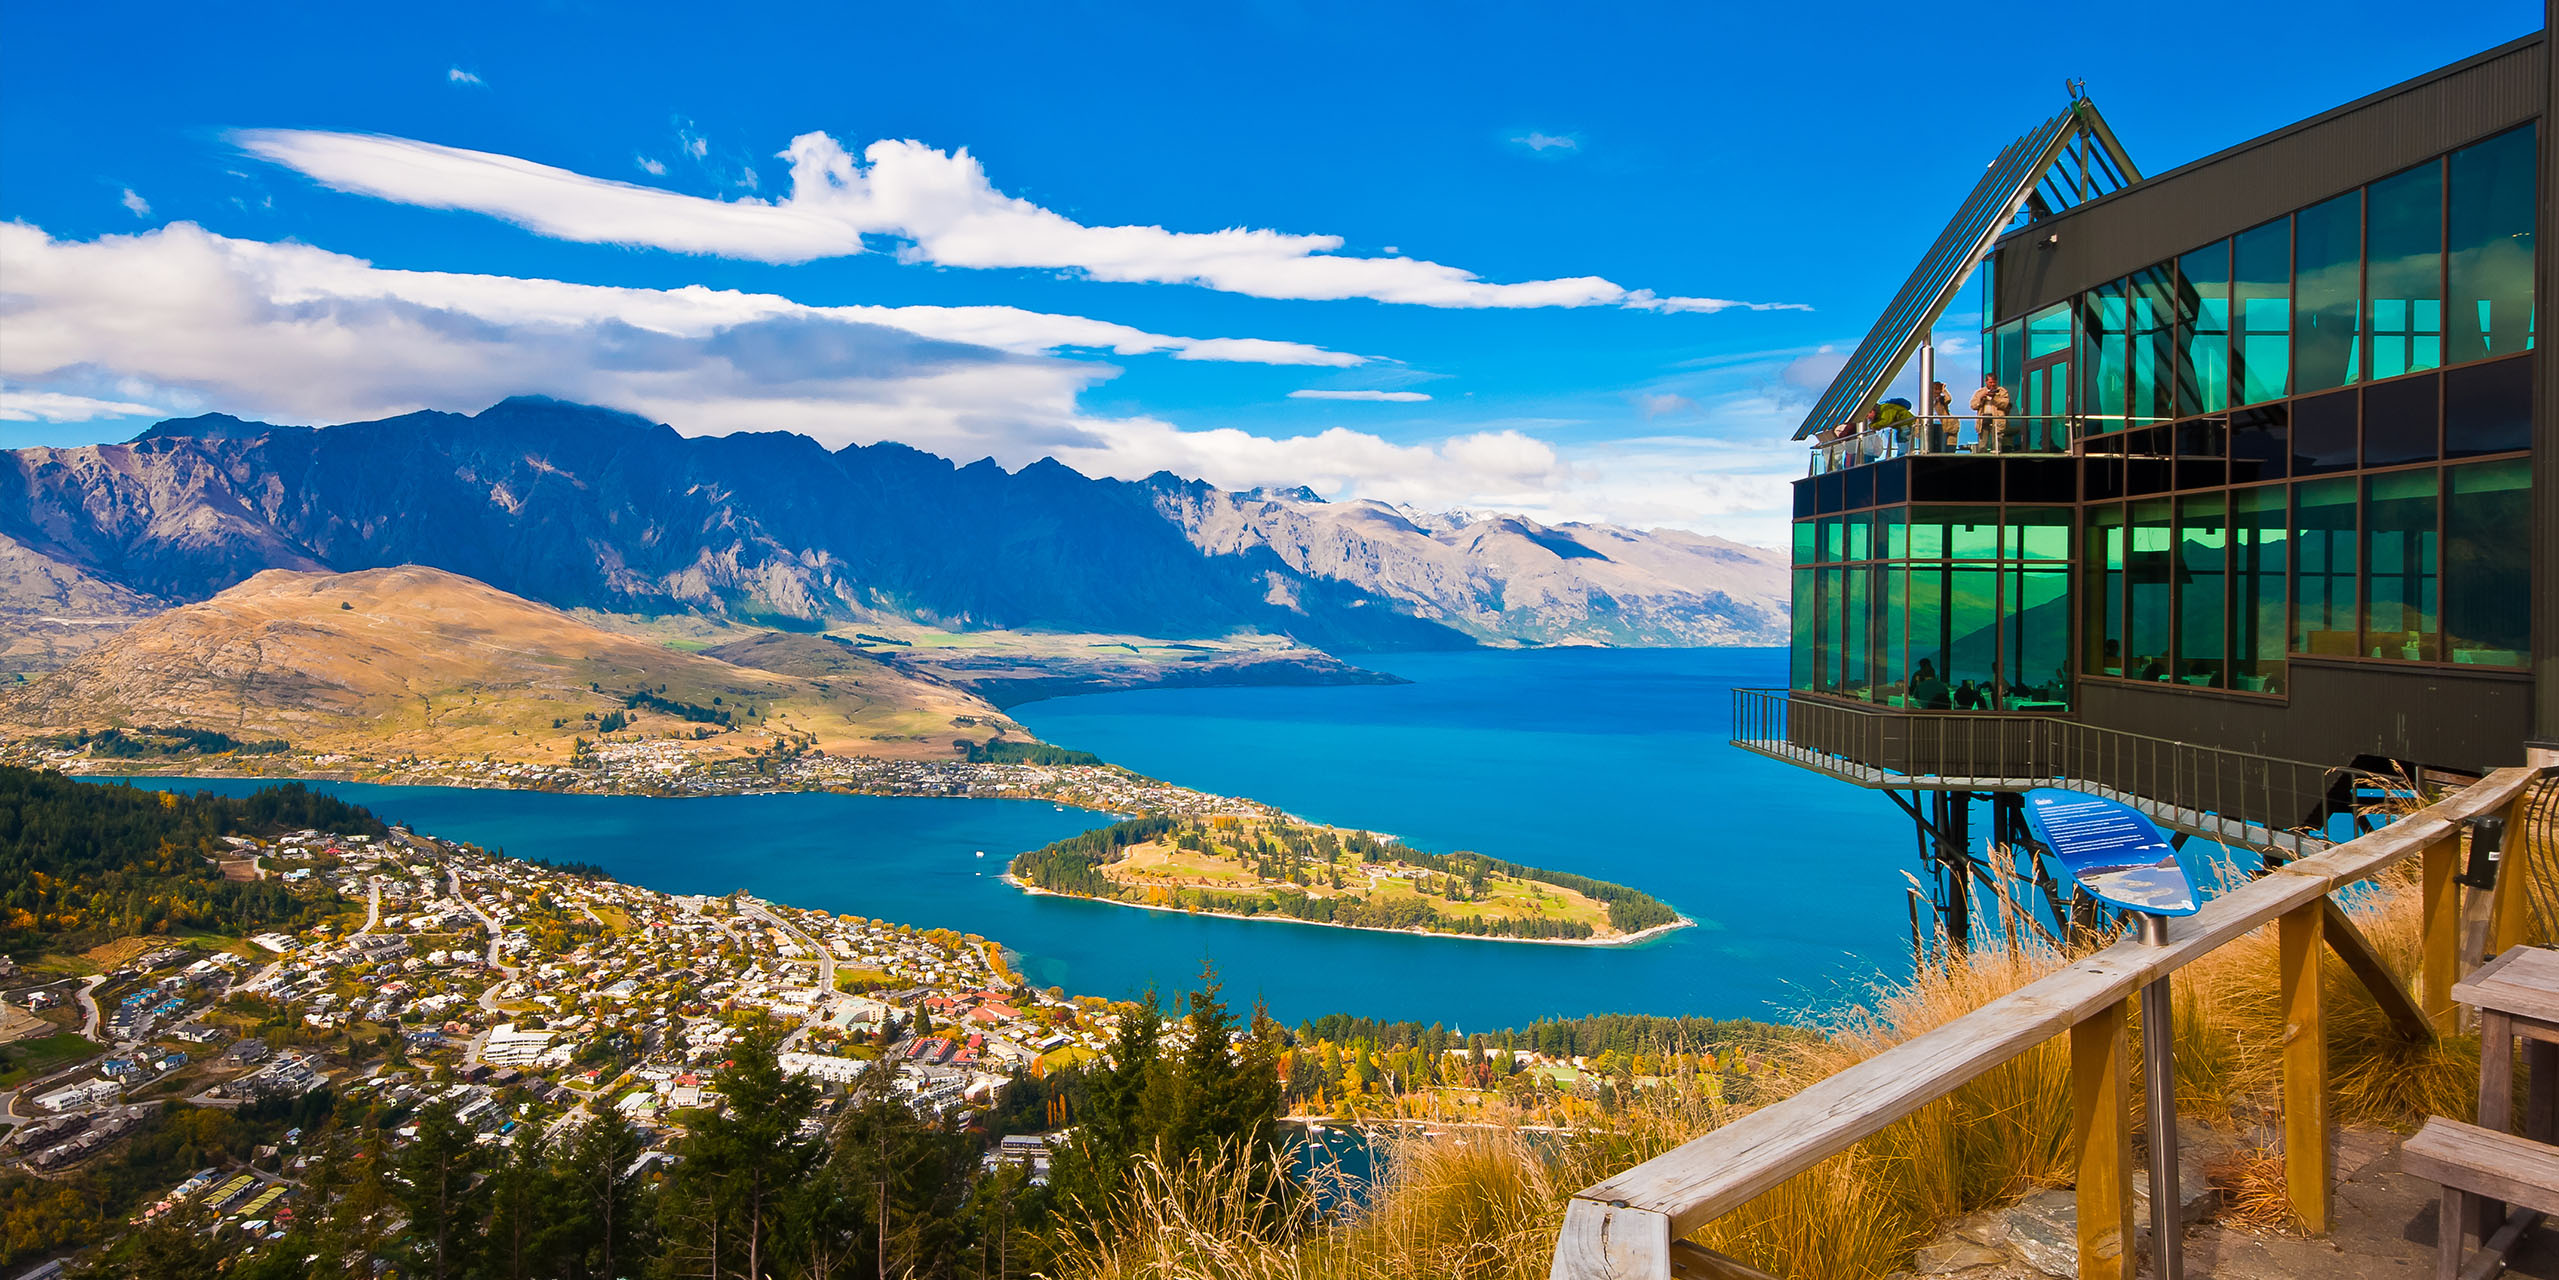 HQ Queenstown (New Zealand) Wallpapers | File 809.99Kb